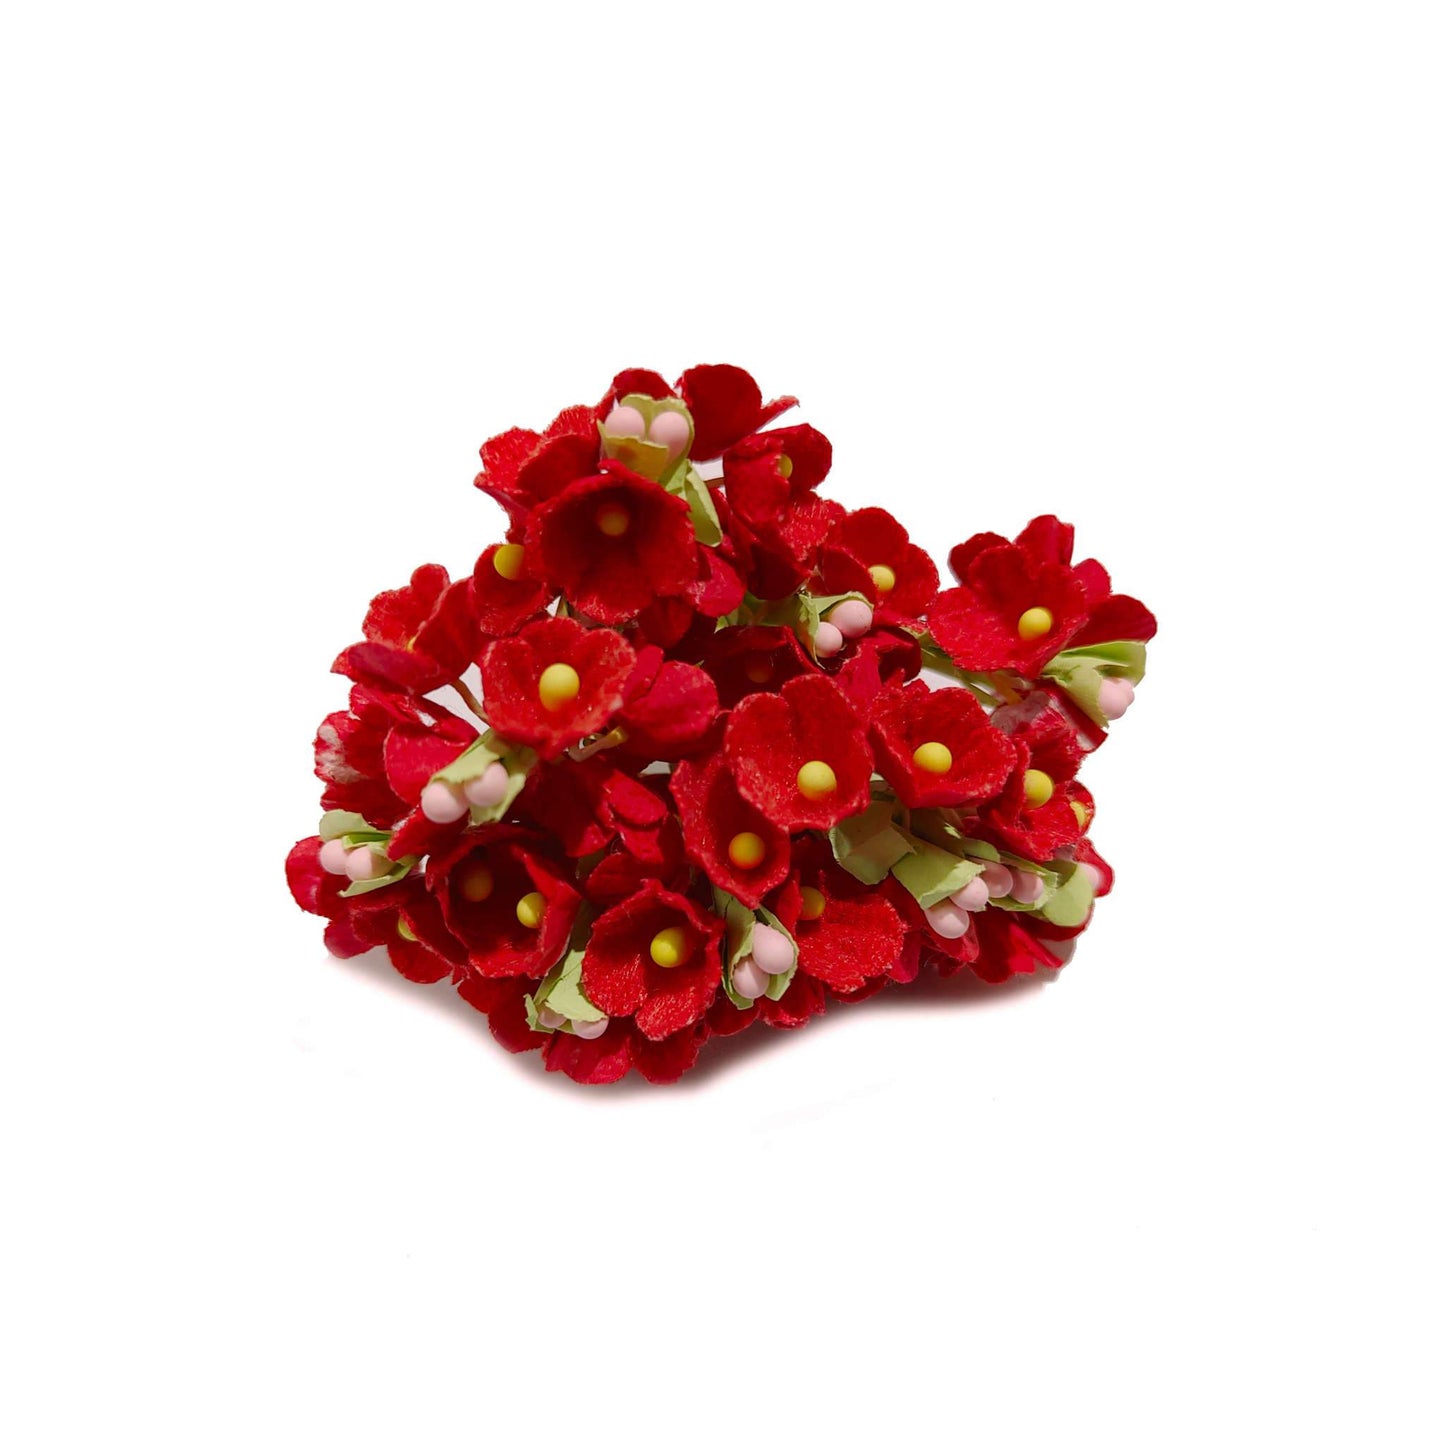 Indian Petals Beautiful Small Paper Flowers for DIY Craft, Trousseau Packing or Decoration - Design 29, Bloody Red